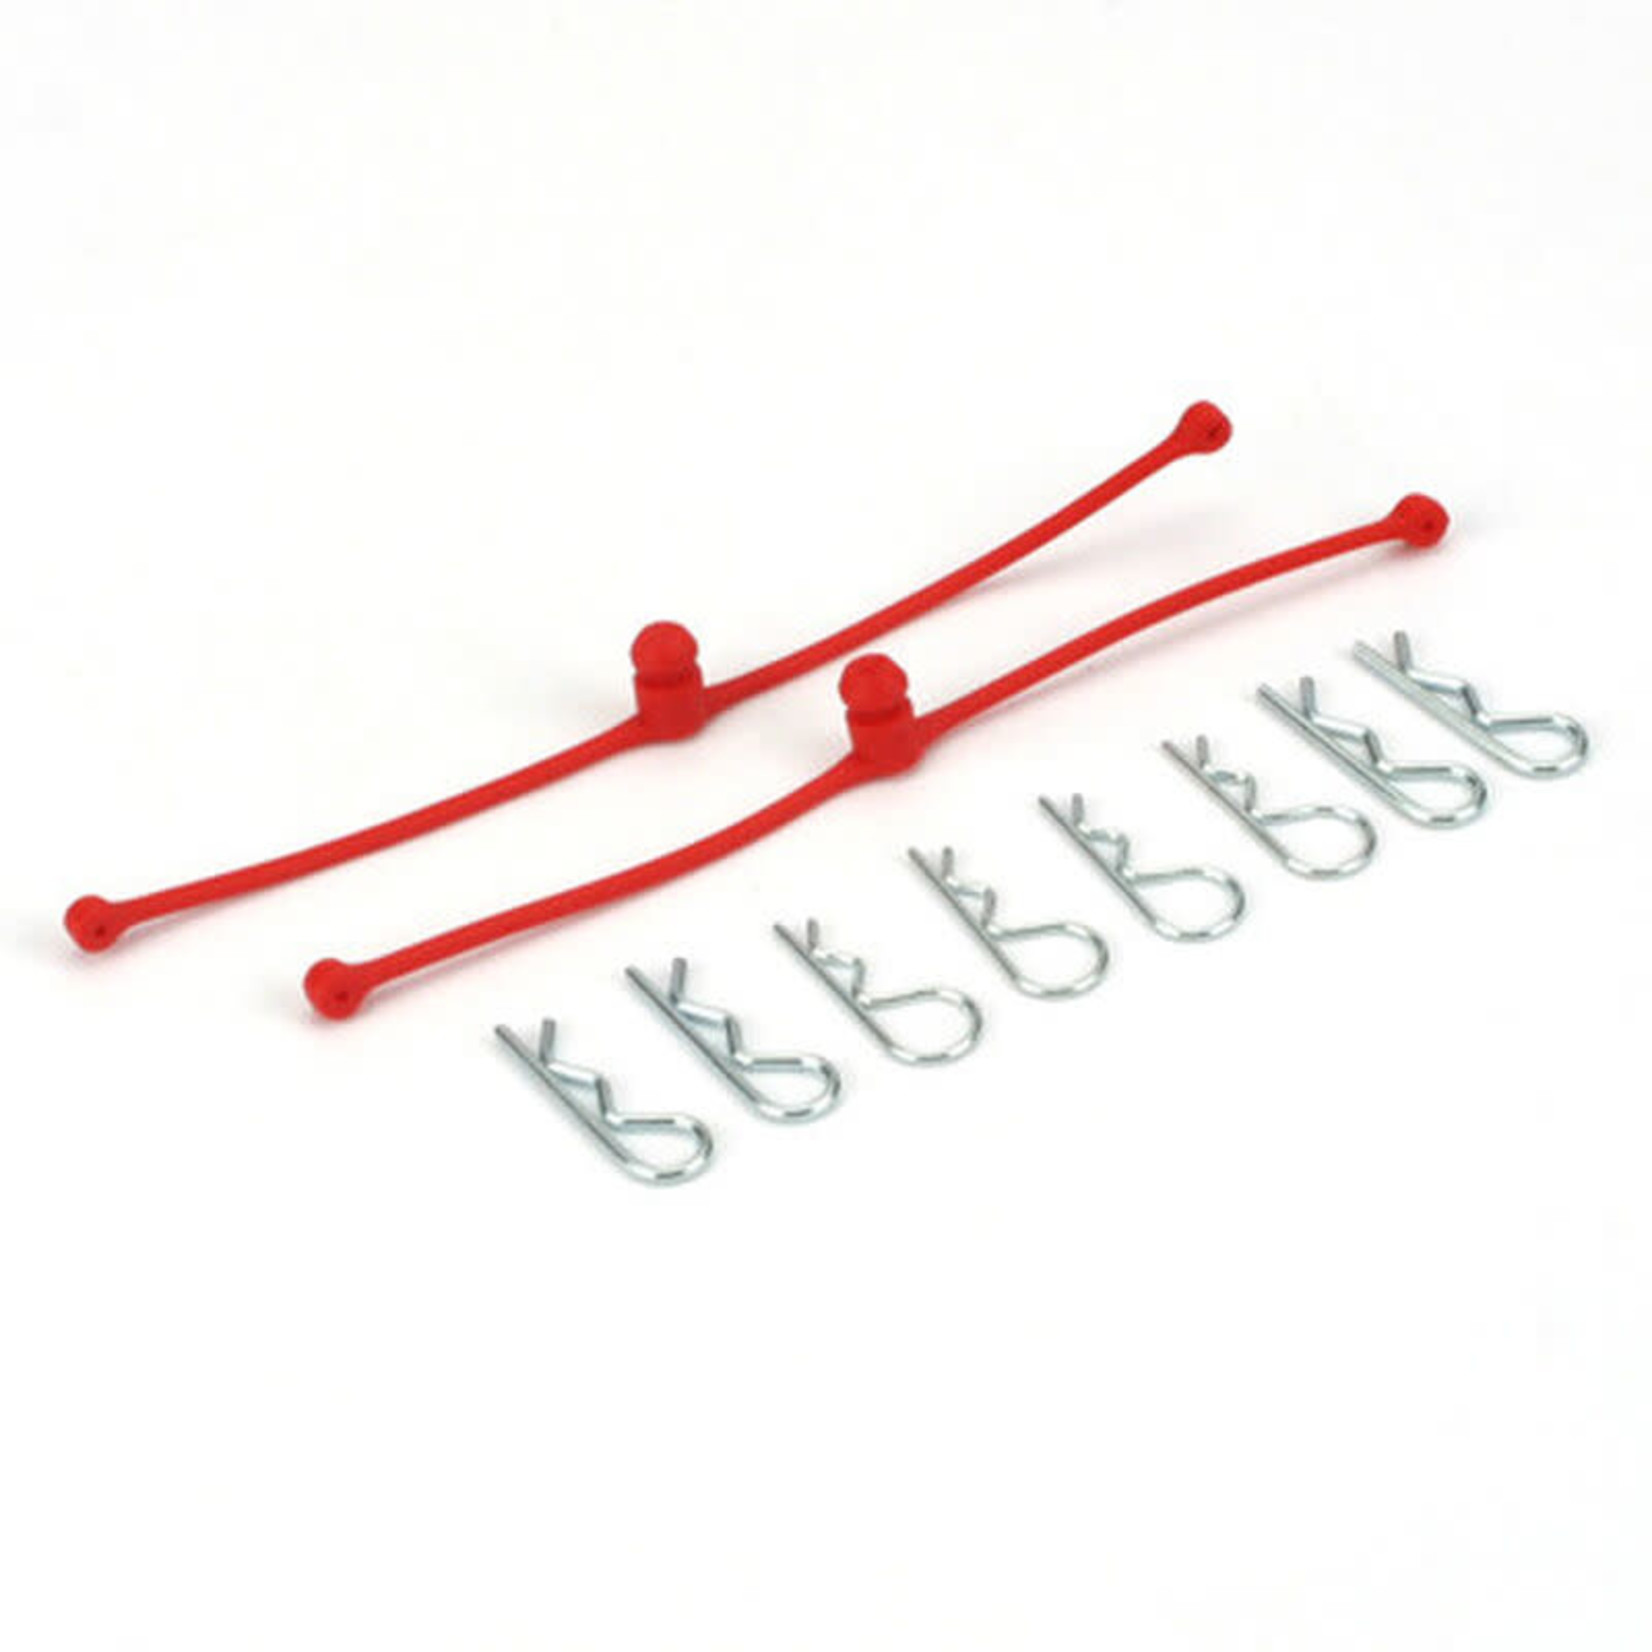 DuBro DuBro Body Klip Retainers, Red (2)